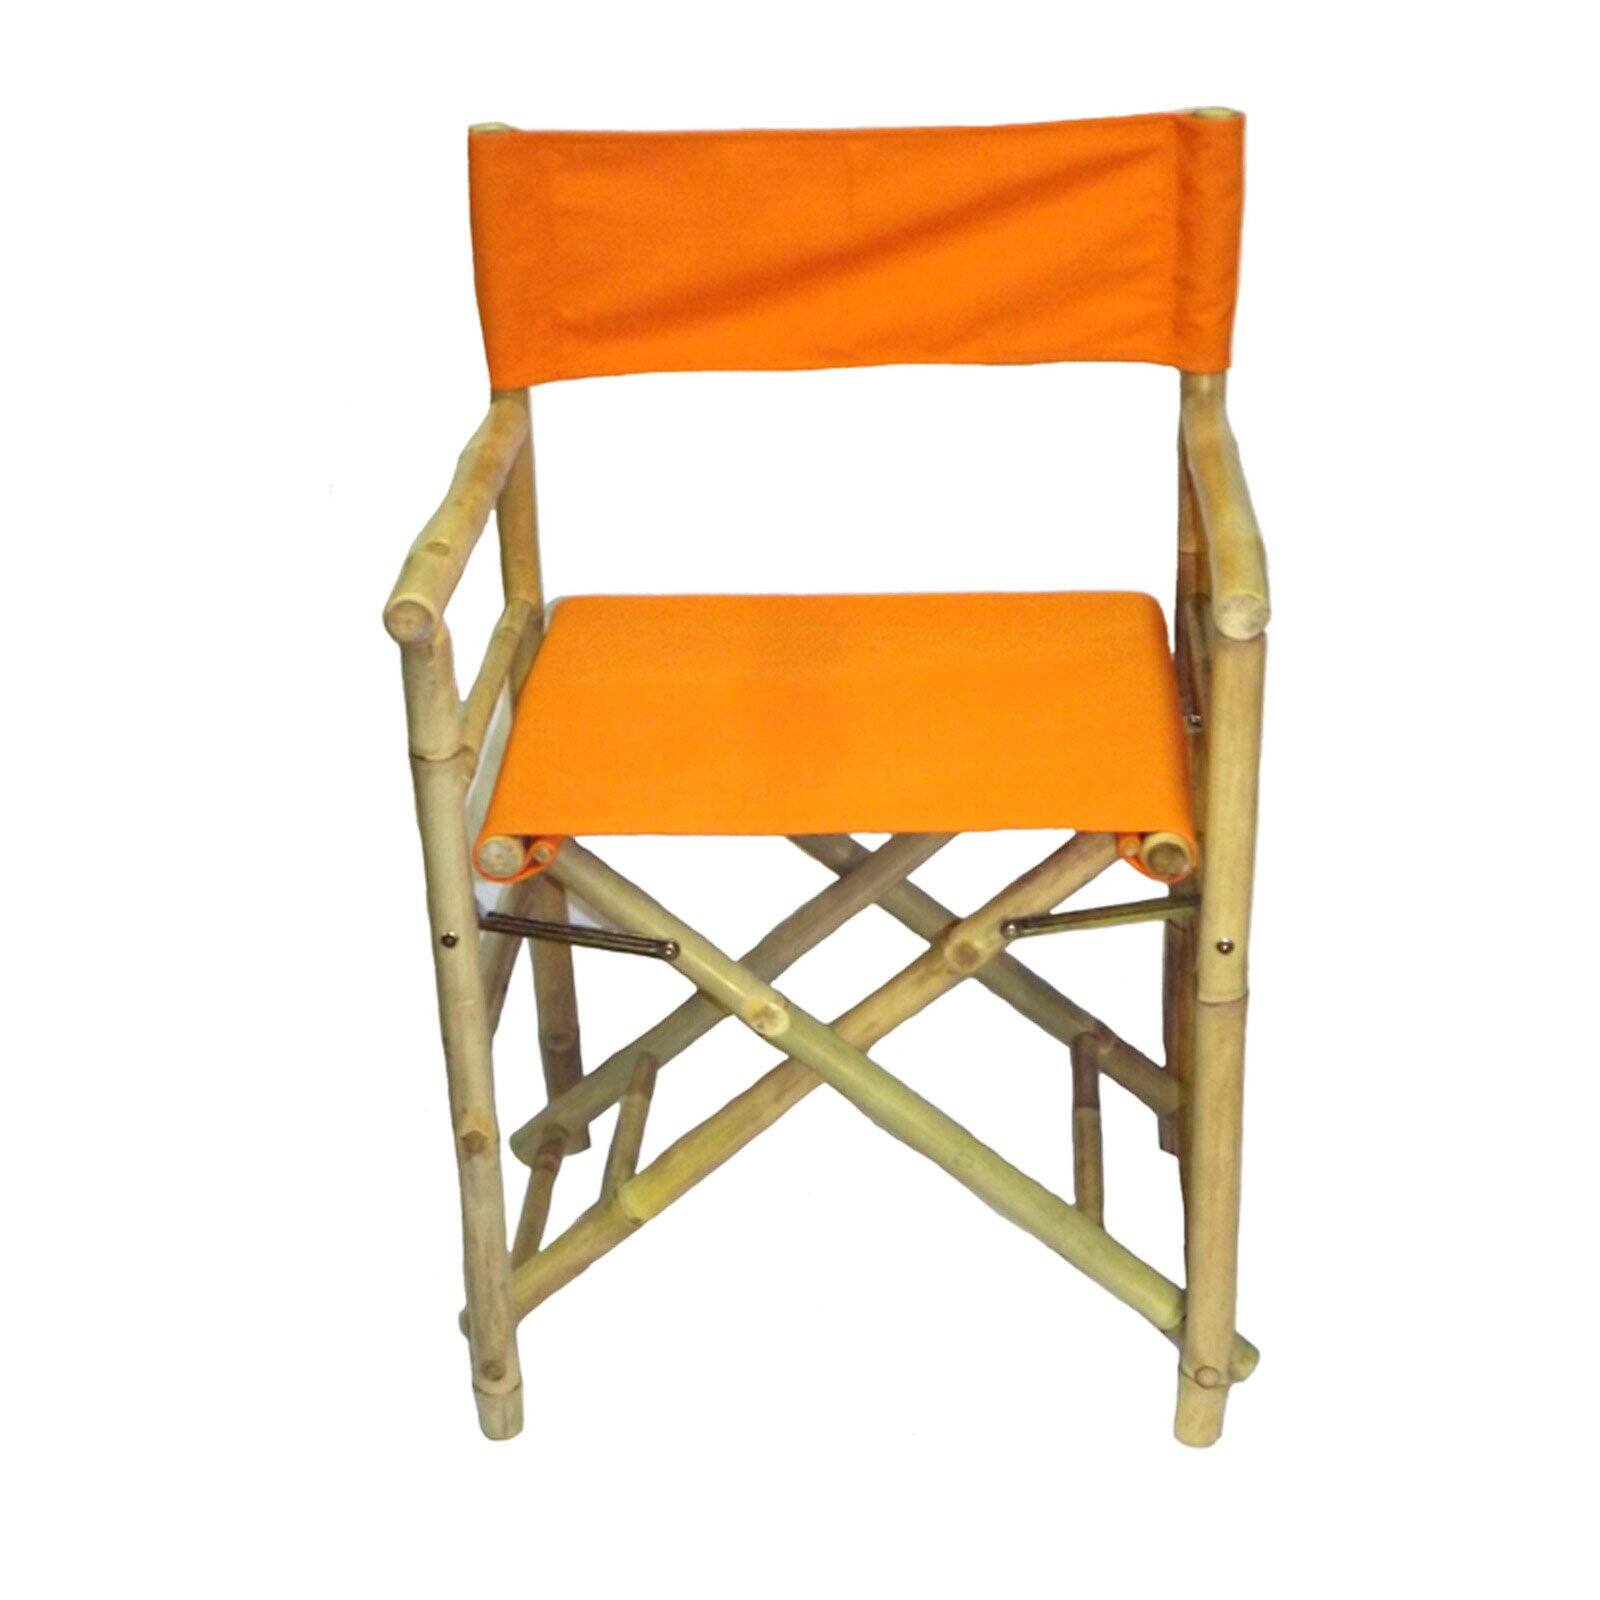 Bamboo54 Folding Bamboo Low Directors Chair with Canvas Cover - Set of 2 - image 1 of 5